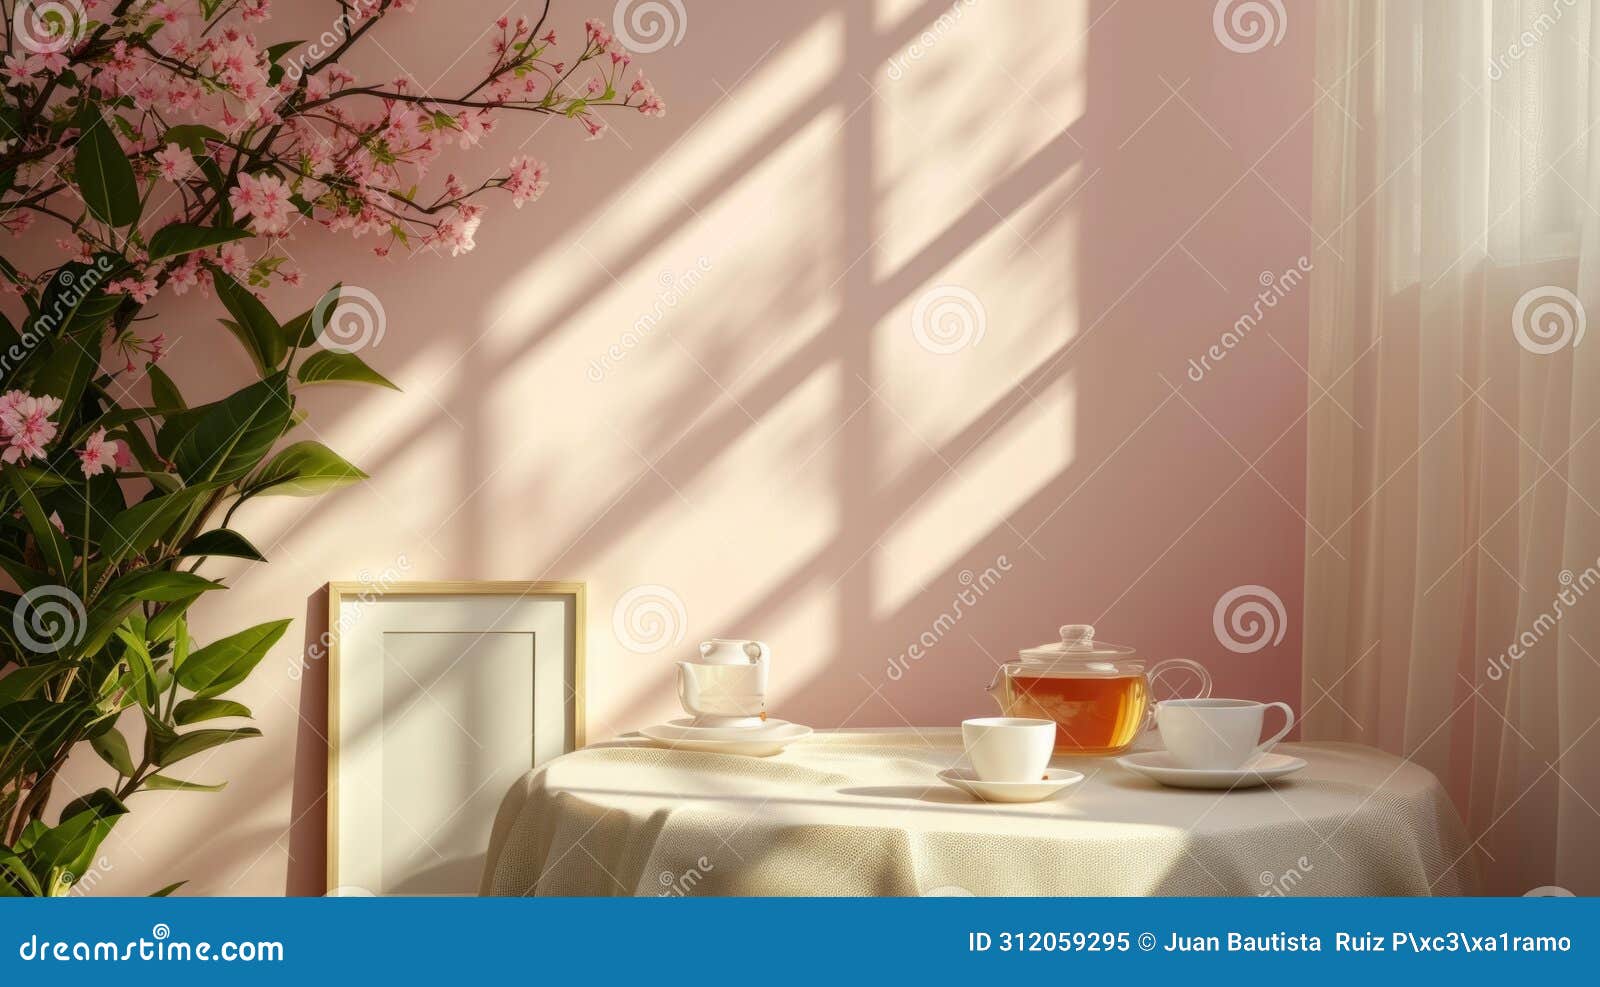 a mock-up of a blank menu or order card on a table with a tasteful tea set in a tranquil setting with soft sunlight.